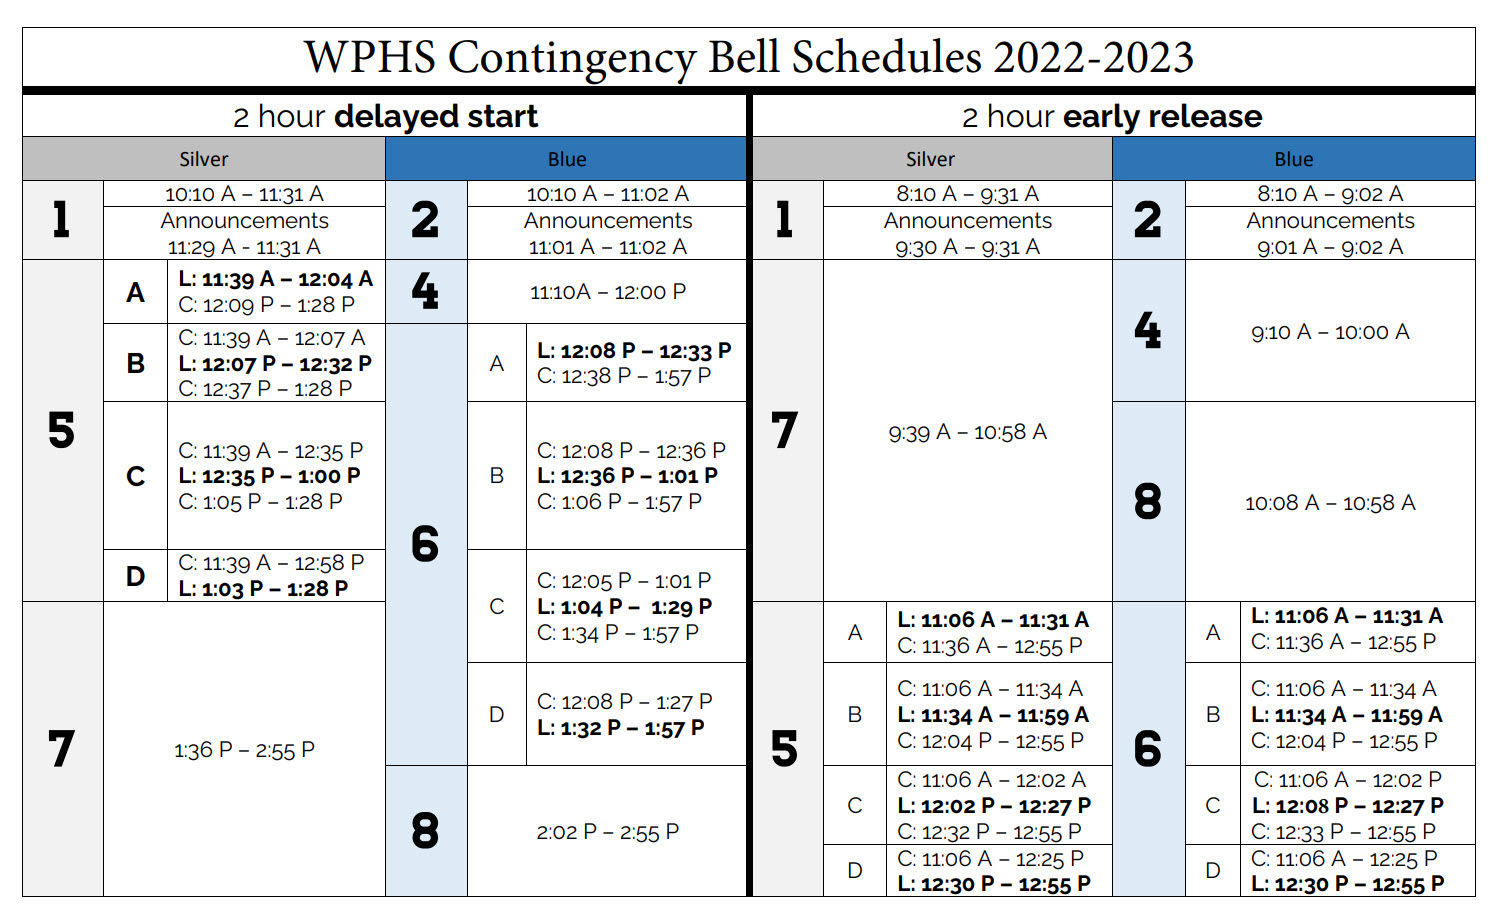 WPHS 2 hour release and delay schedules